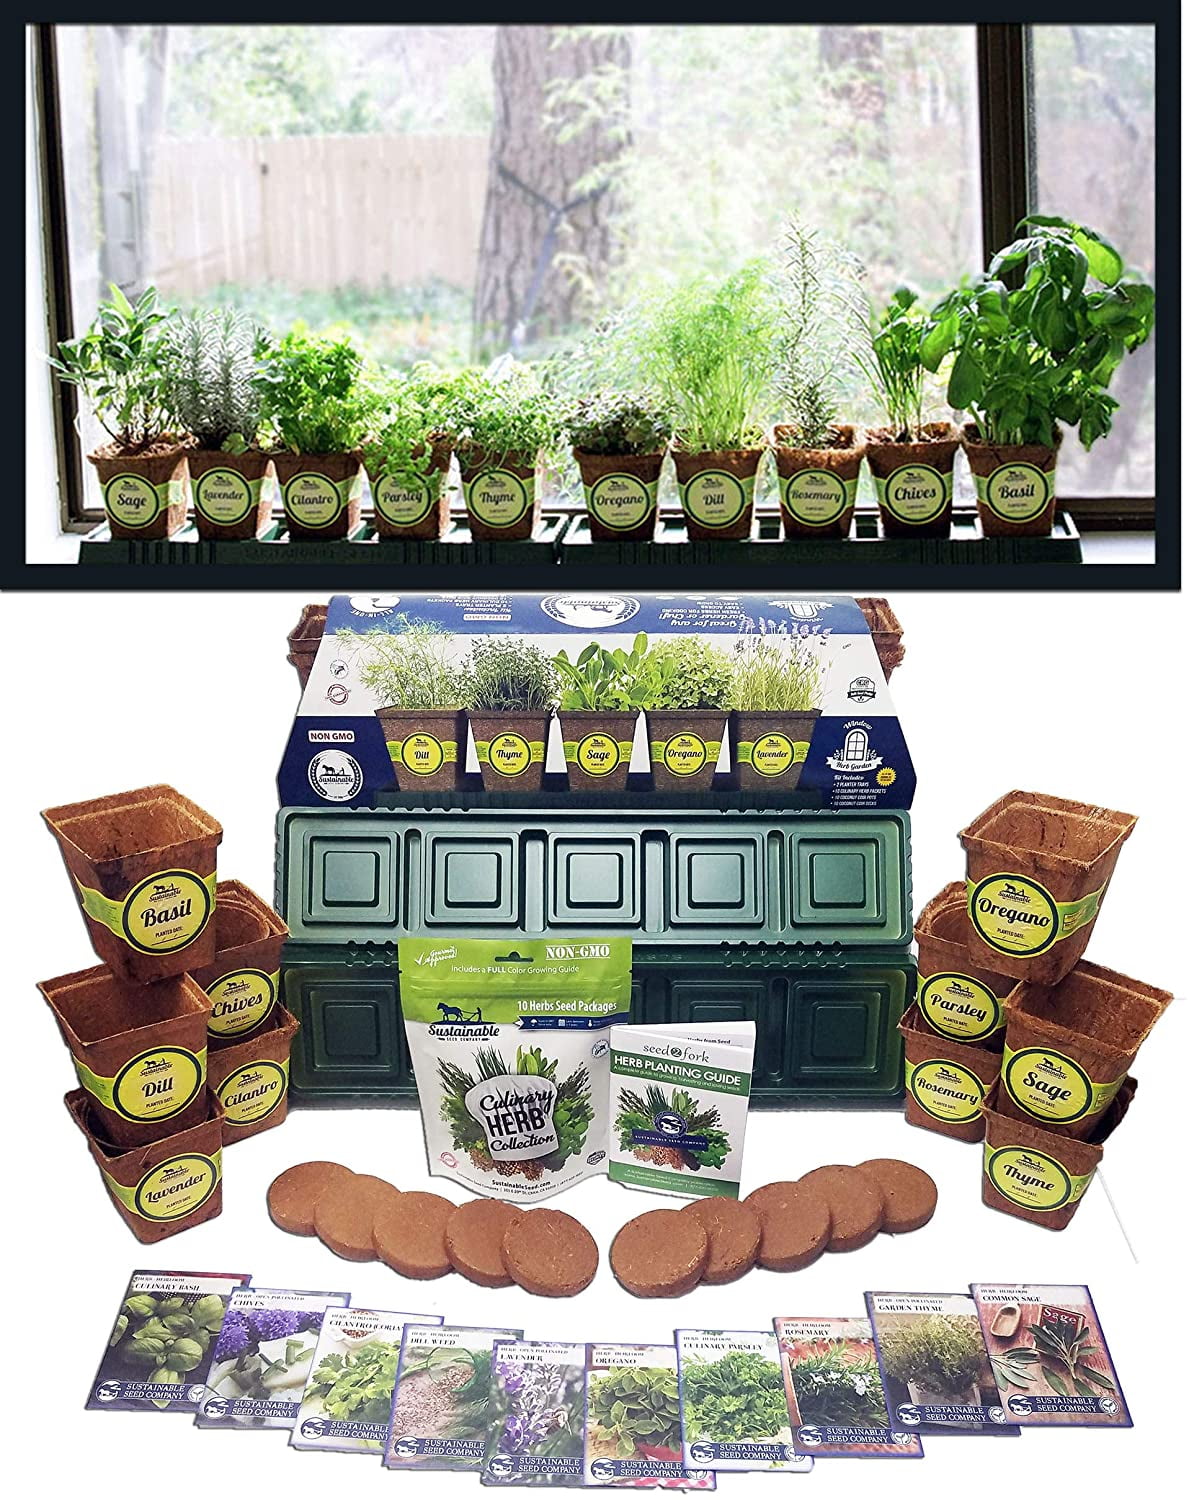 Windowsill Herb Garden Kit Herb Planter Comes Complete with a 10 Variety Non GMO Heirloom Herb Seed Collection & Herb Pots.